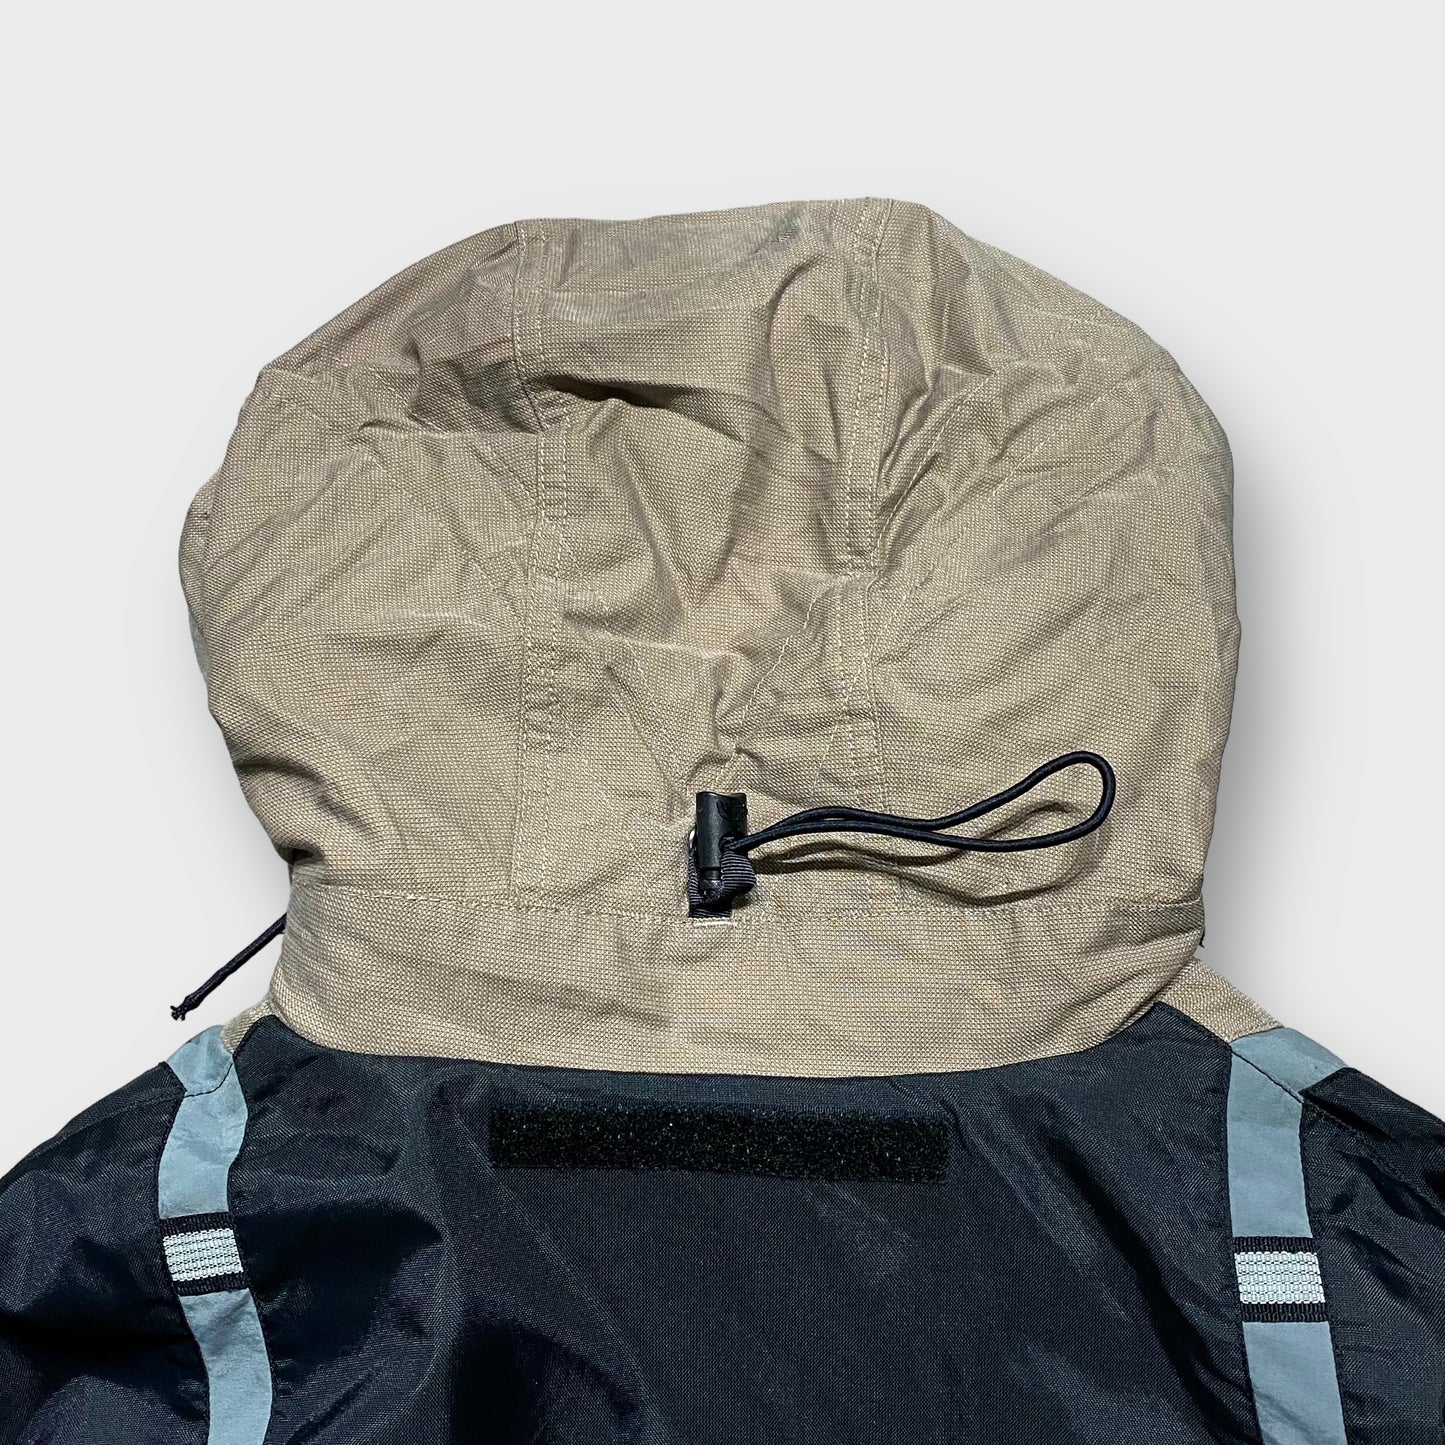 90's "THE NORTH FACE" Sawtooth jacket